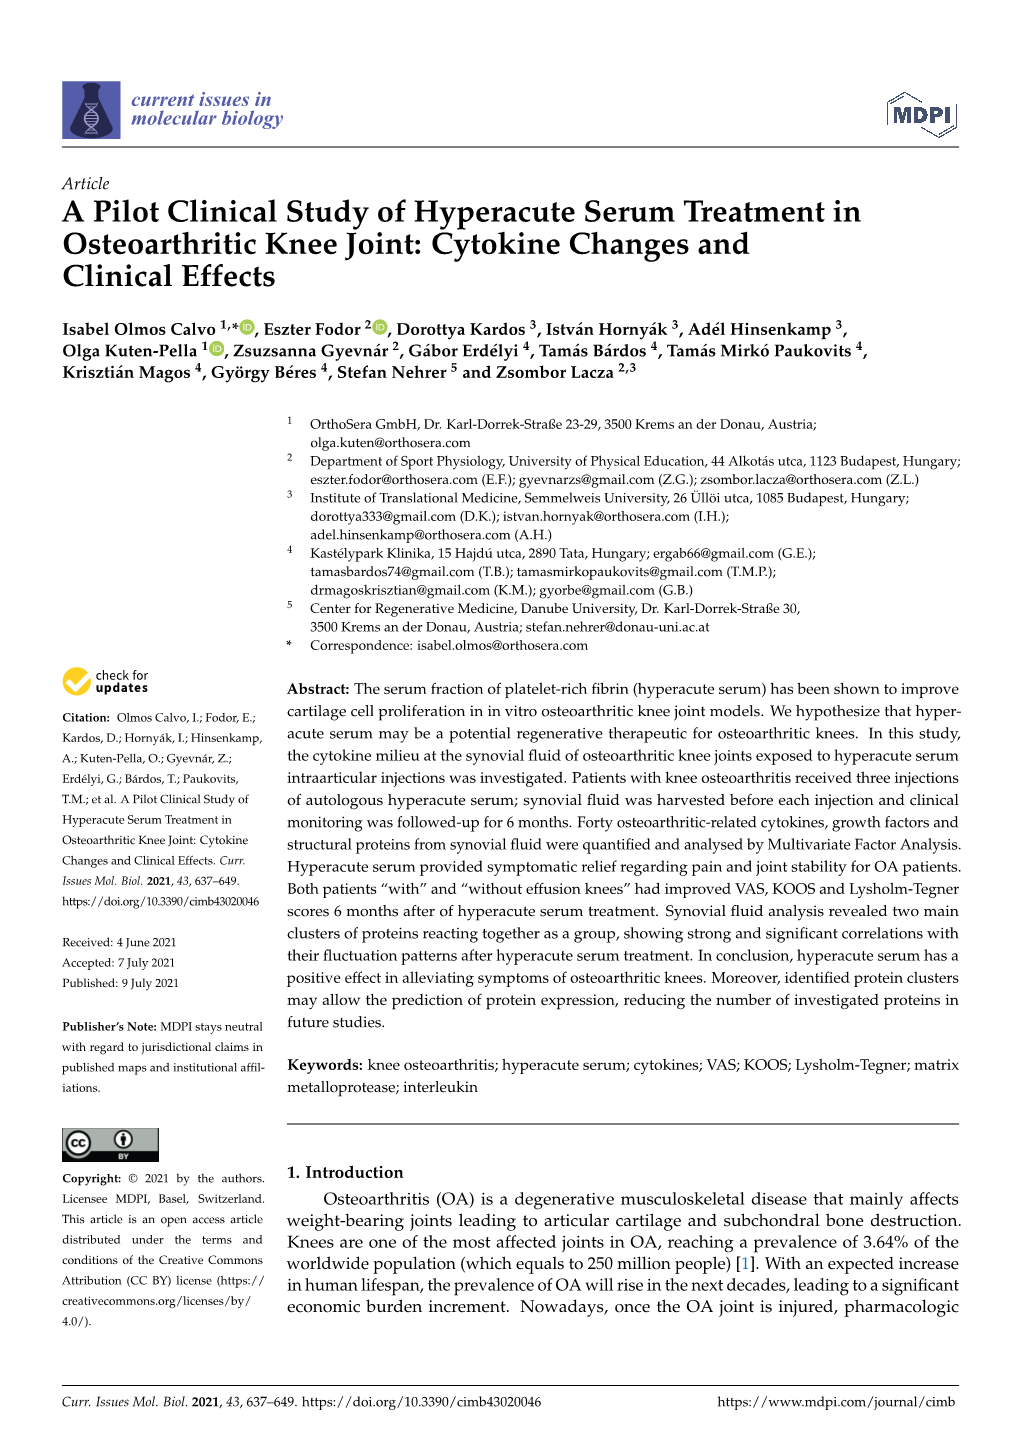 A Pilot Clinical Study of Hyperacute Serum Treatment in Osteoarthritic Knee Joint: Cytokine Changes and Clinical Effects